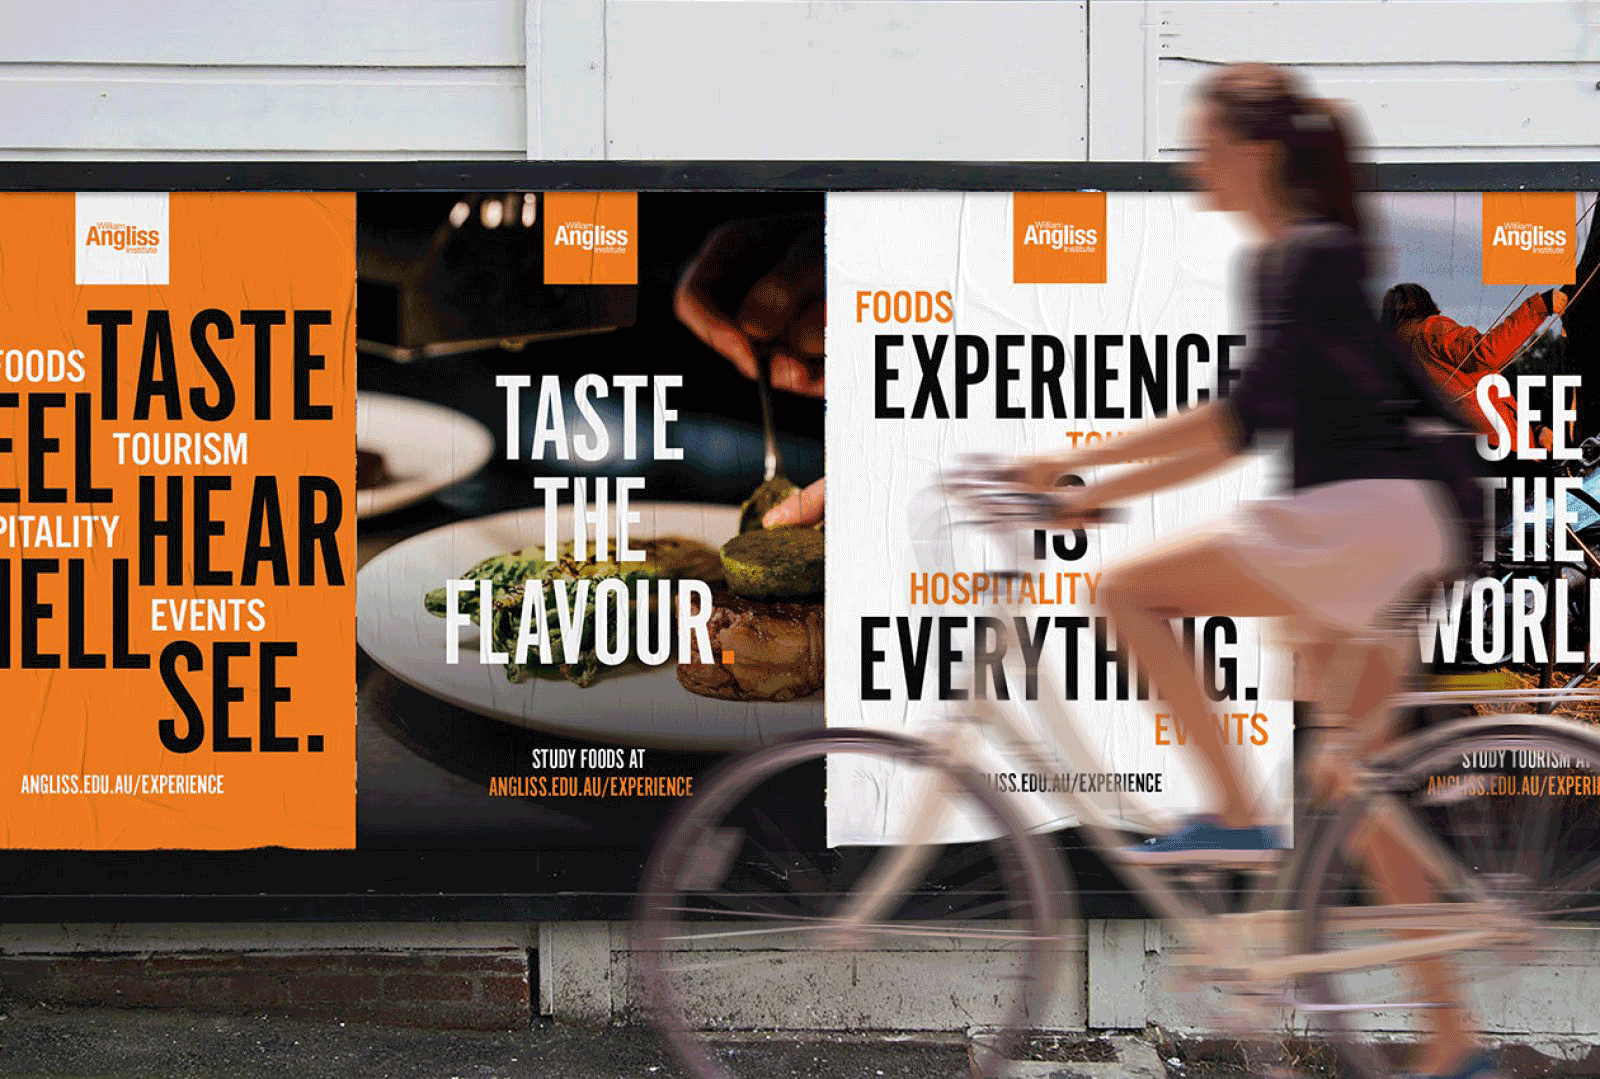 Experience is Everything campaign posters in a street setting with a person riding a bicycle in the foreground